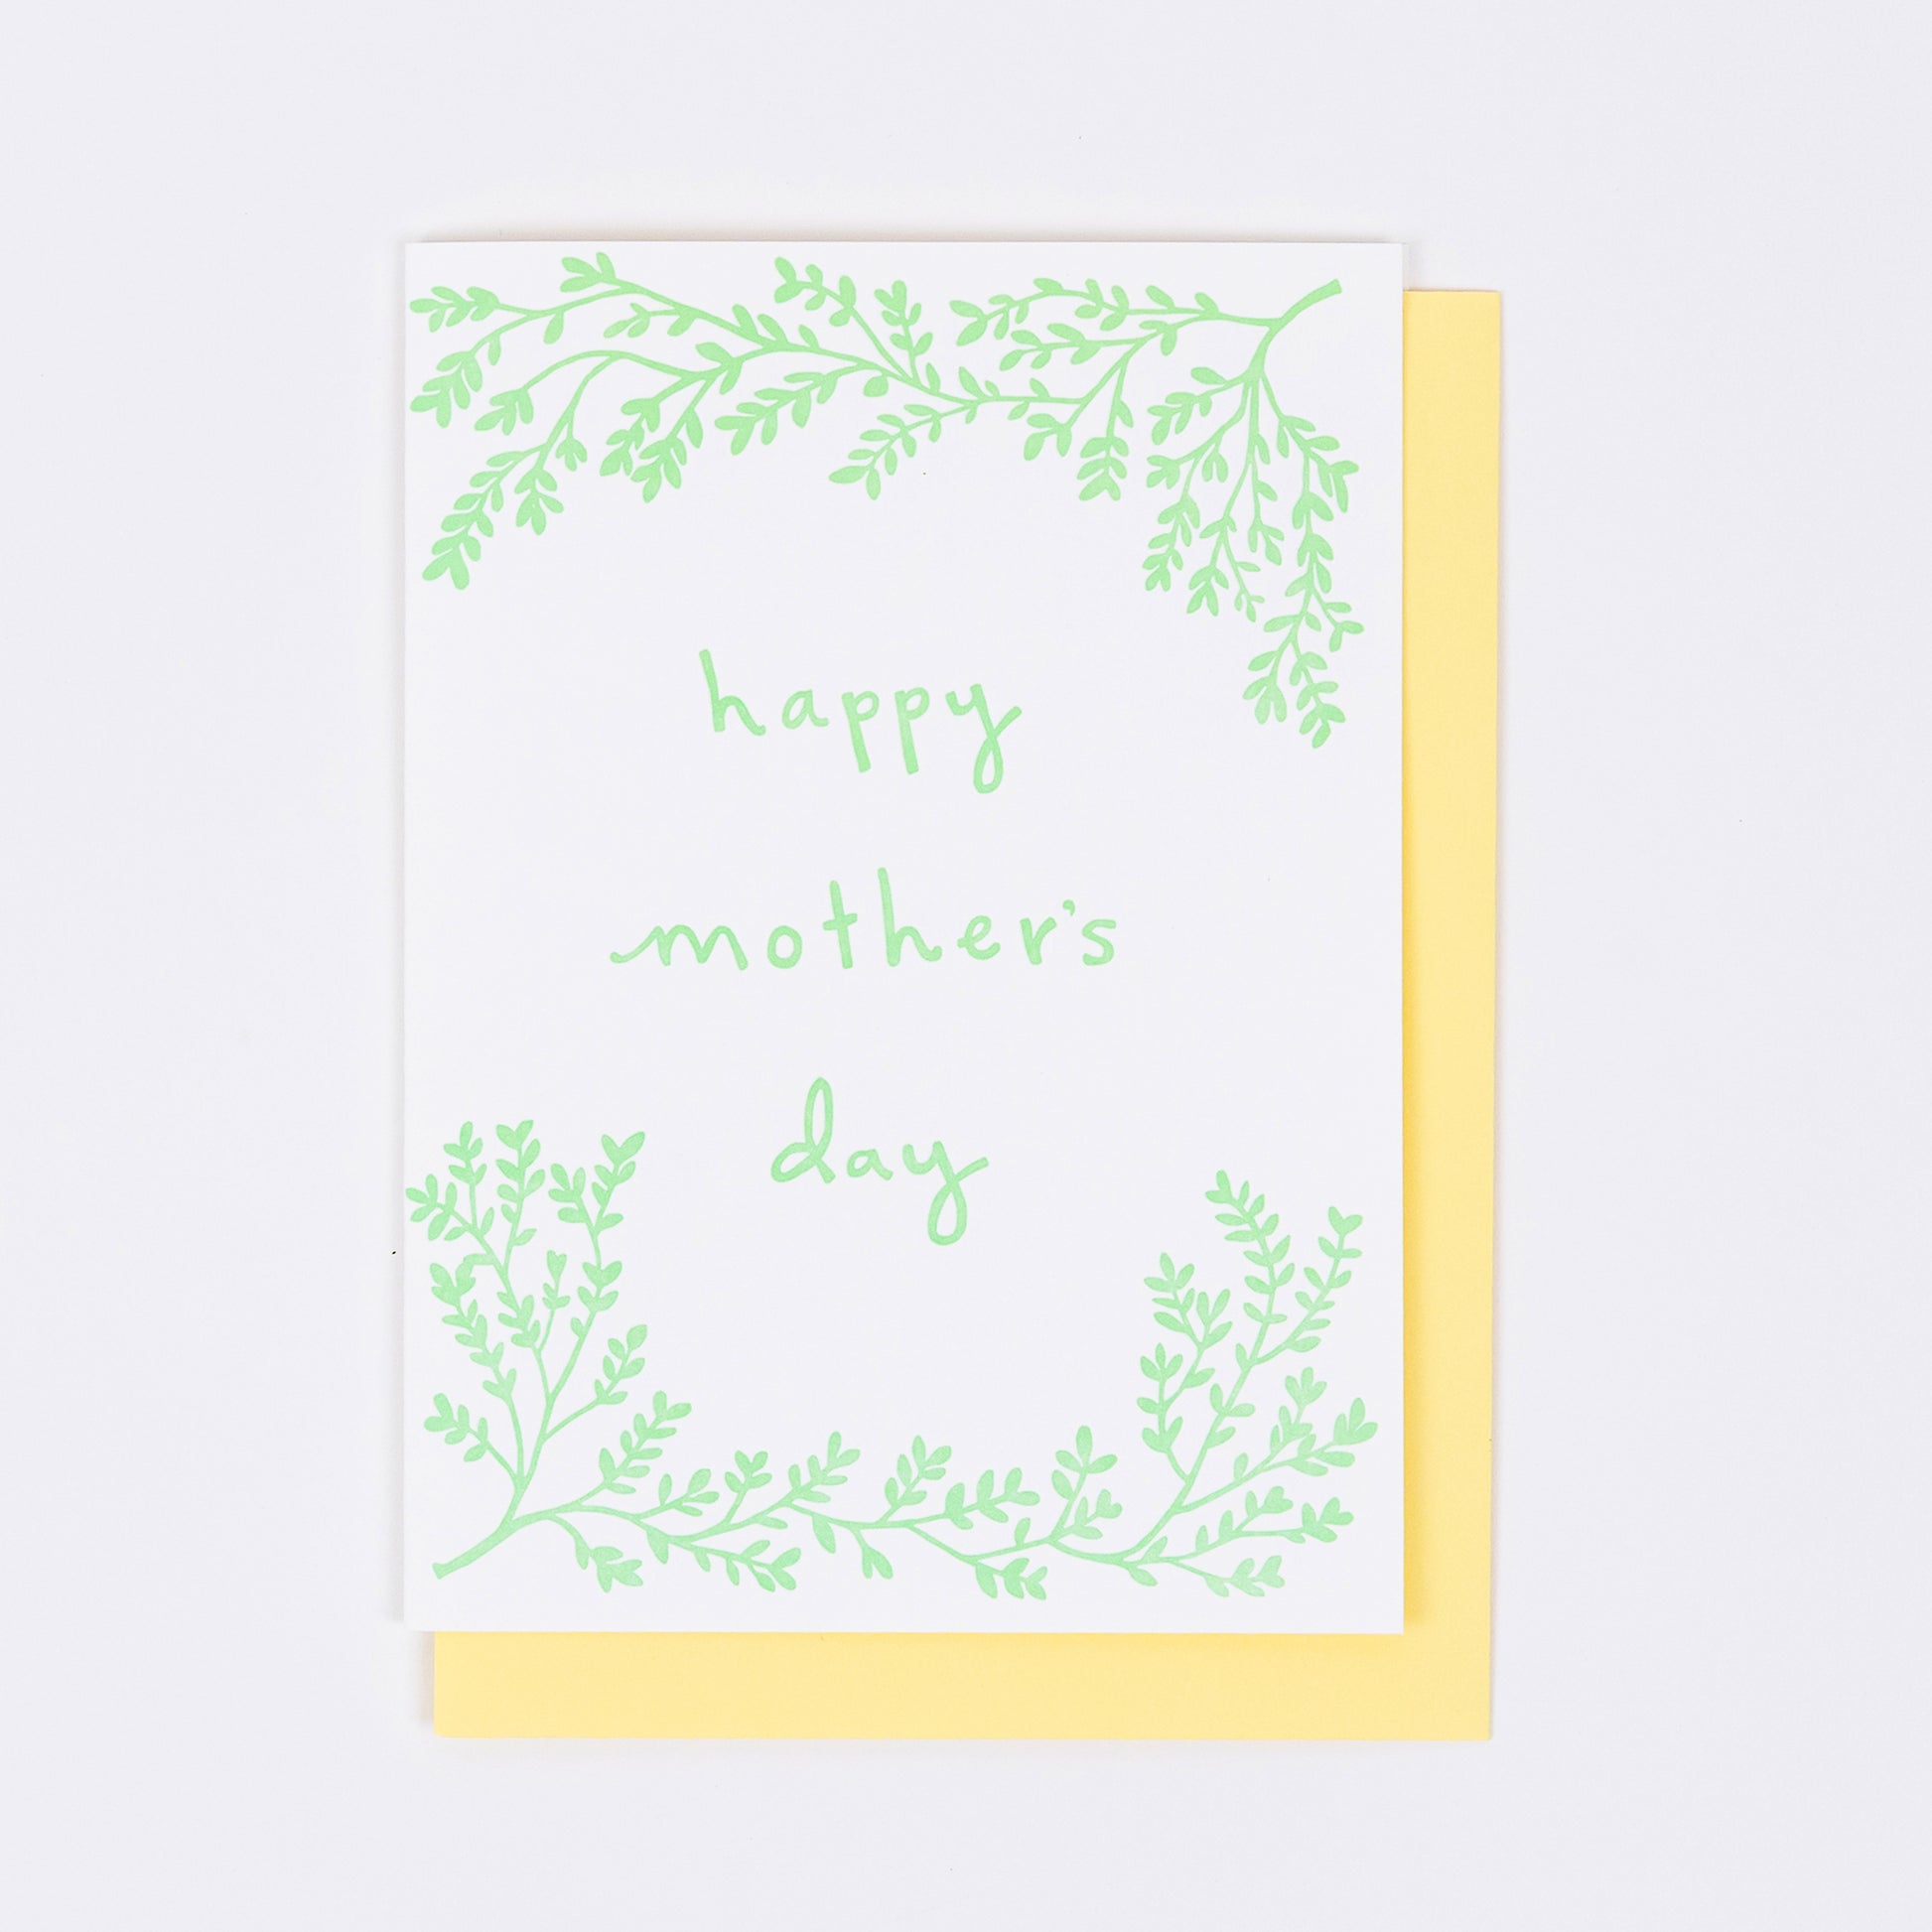 Letterpress greeting card featuring hand-drawn branches, printed in a soft minty green ink. The center of the card says "Happy Mother's Day" in a whimsical hand-drawn text, in the same minty green ink. The card is white, blank inside, and is paired with a warm yellow envelope.